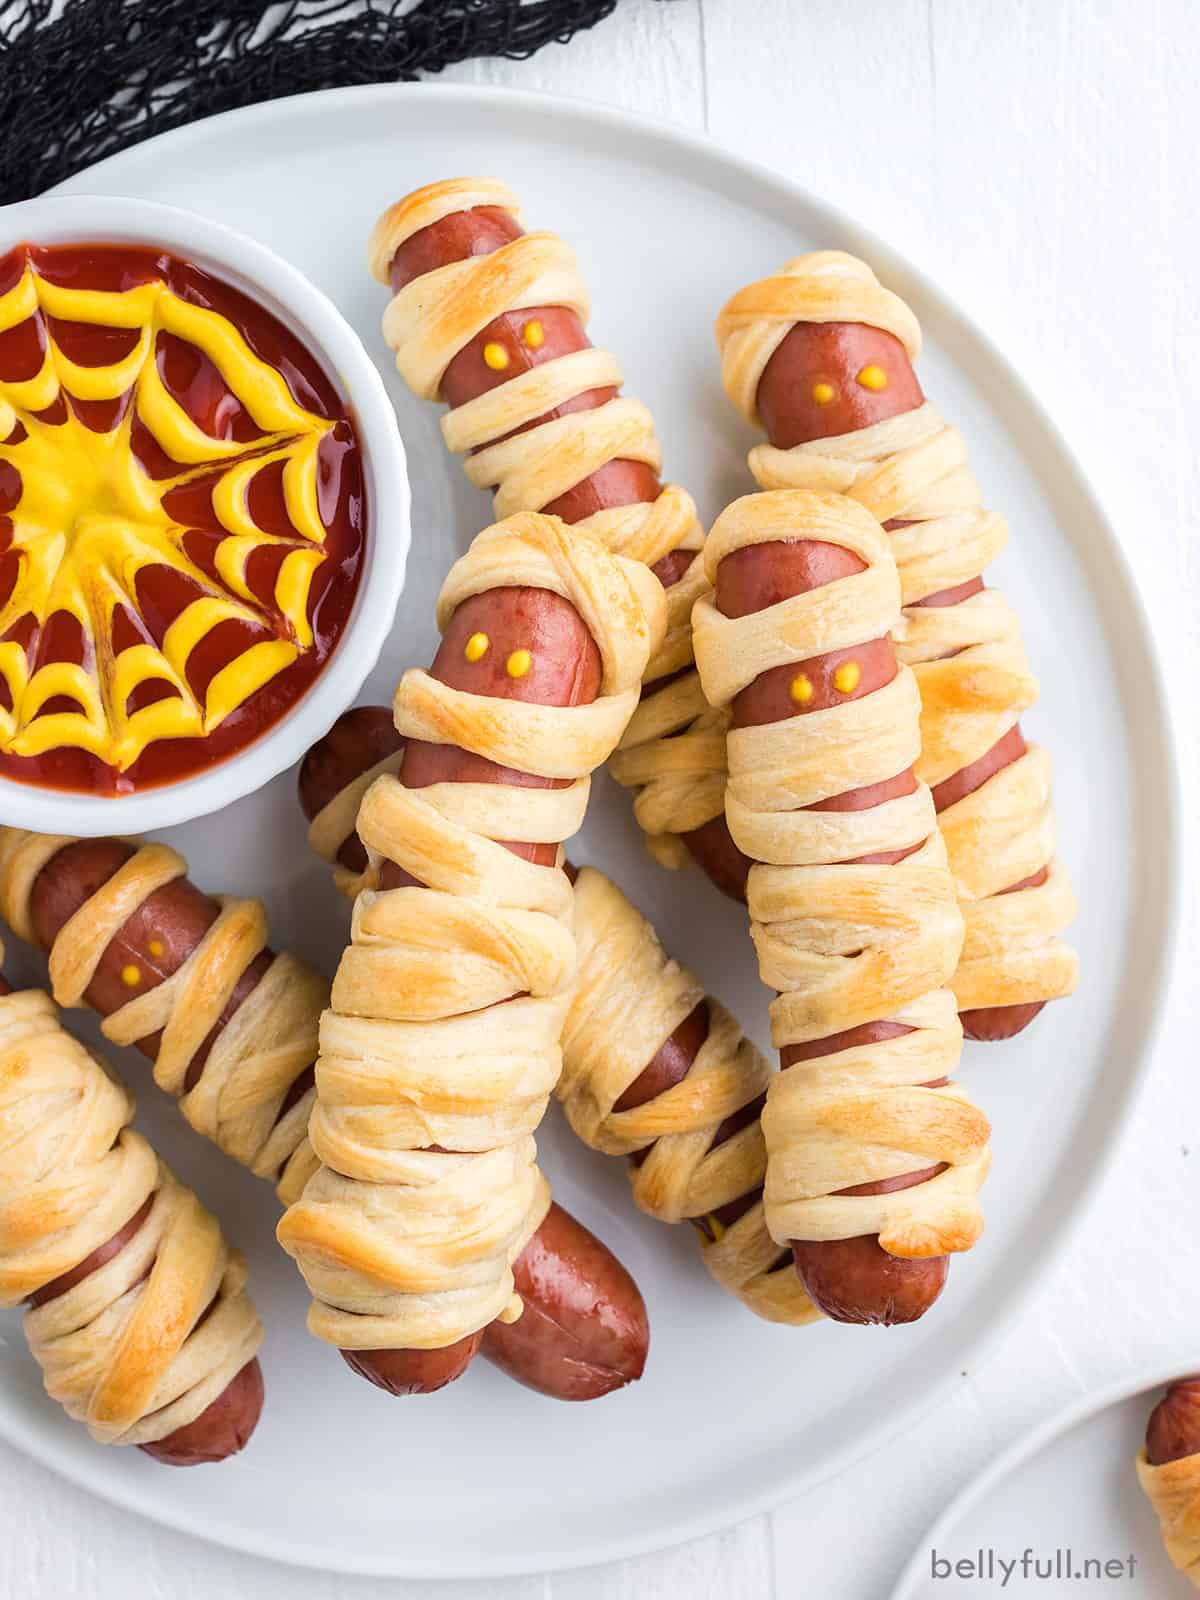 Mummy Wrapped Hot Dogs; Part of 15 Spooky Savory Halloween Dishes, assembled by Jane Bonacci, The Heritage Cook, 2022. 